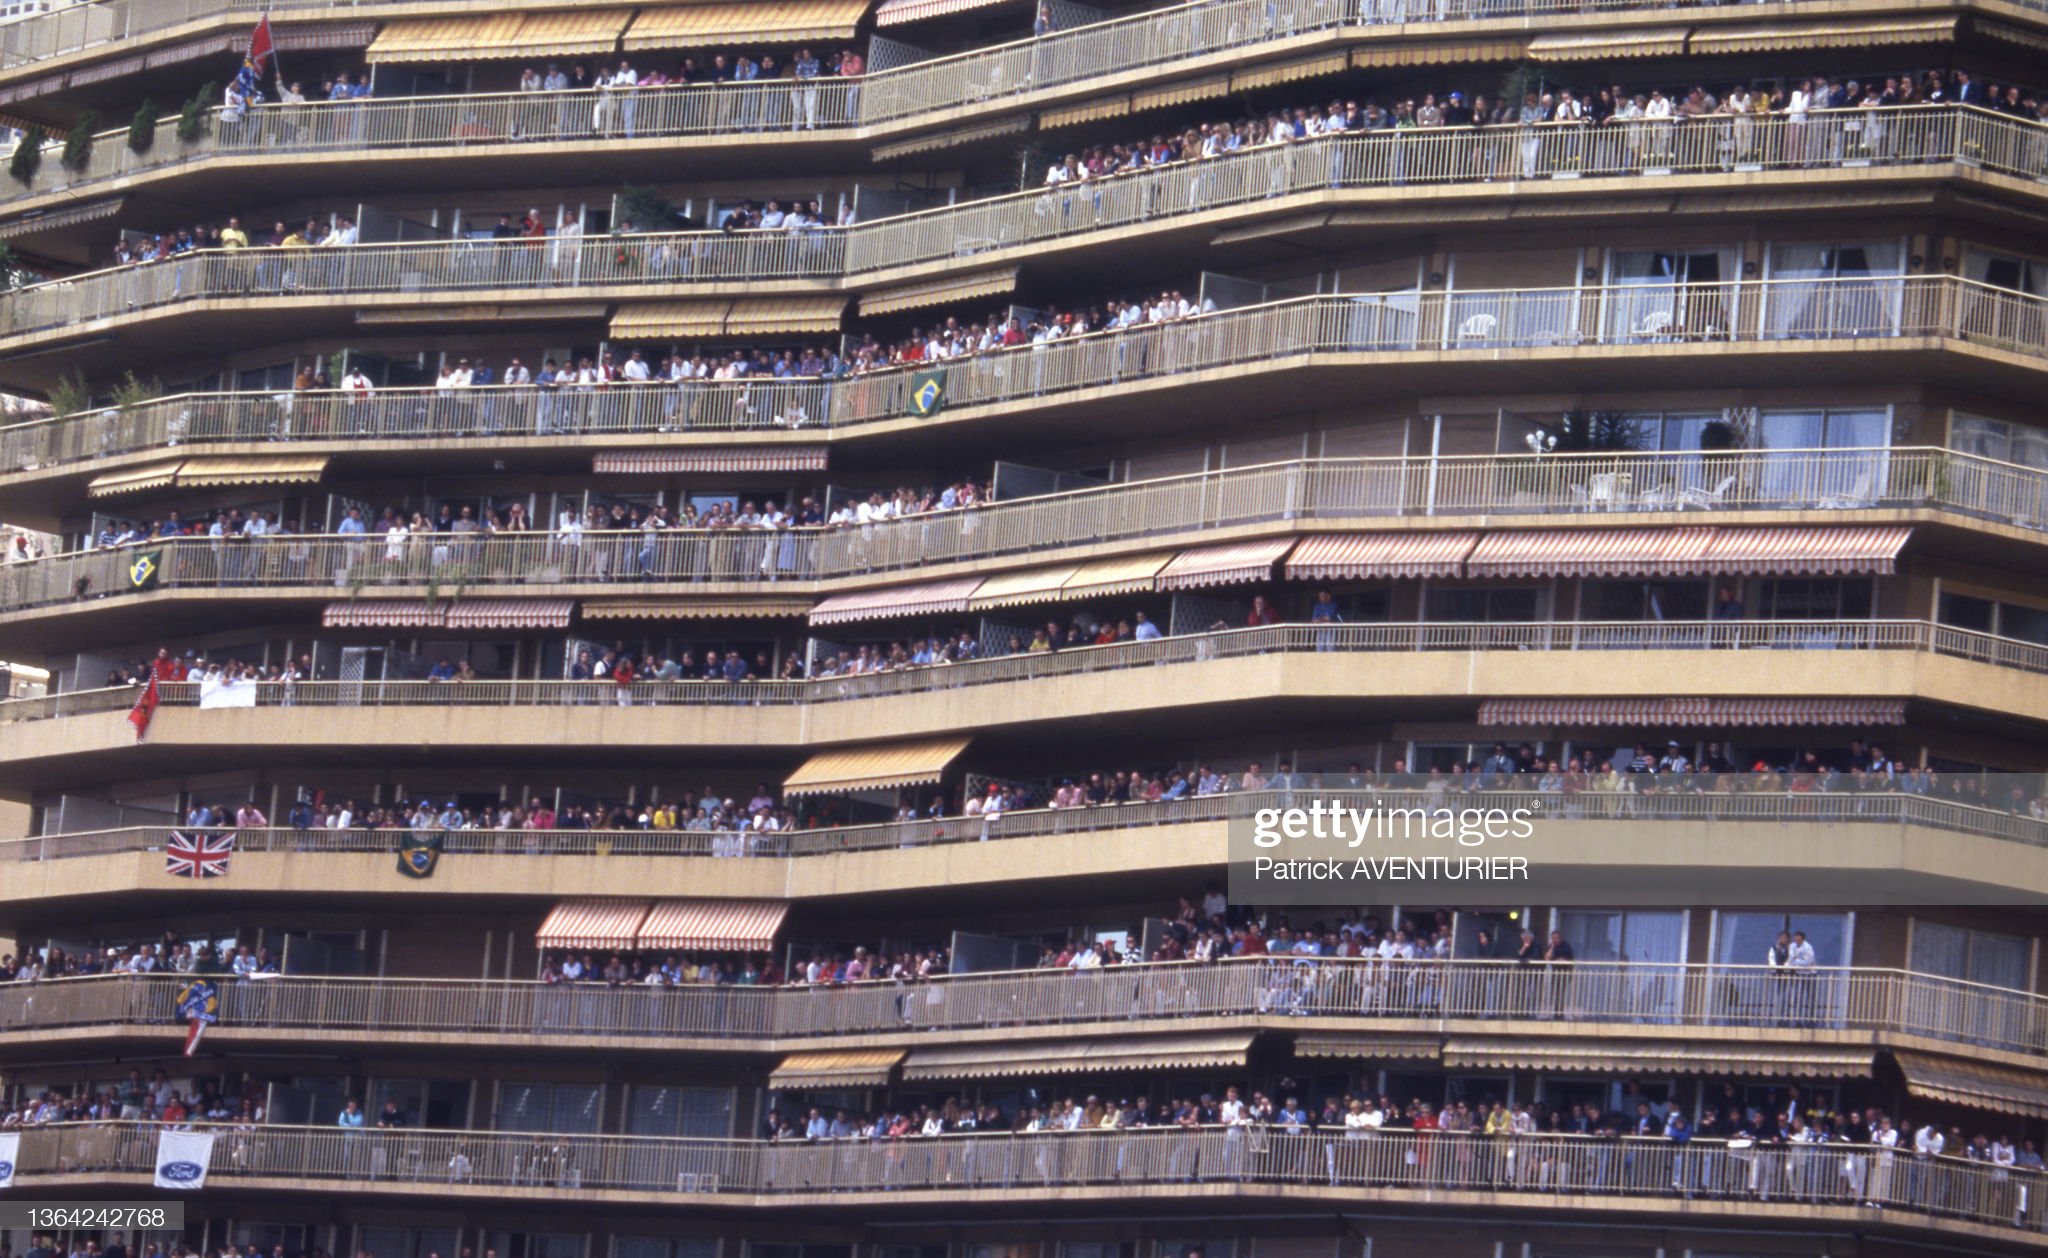 The crowds watch from the balconies of buildings at the Monaco Grand Prix in 1989.